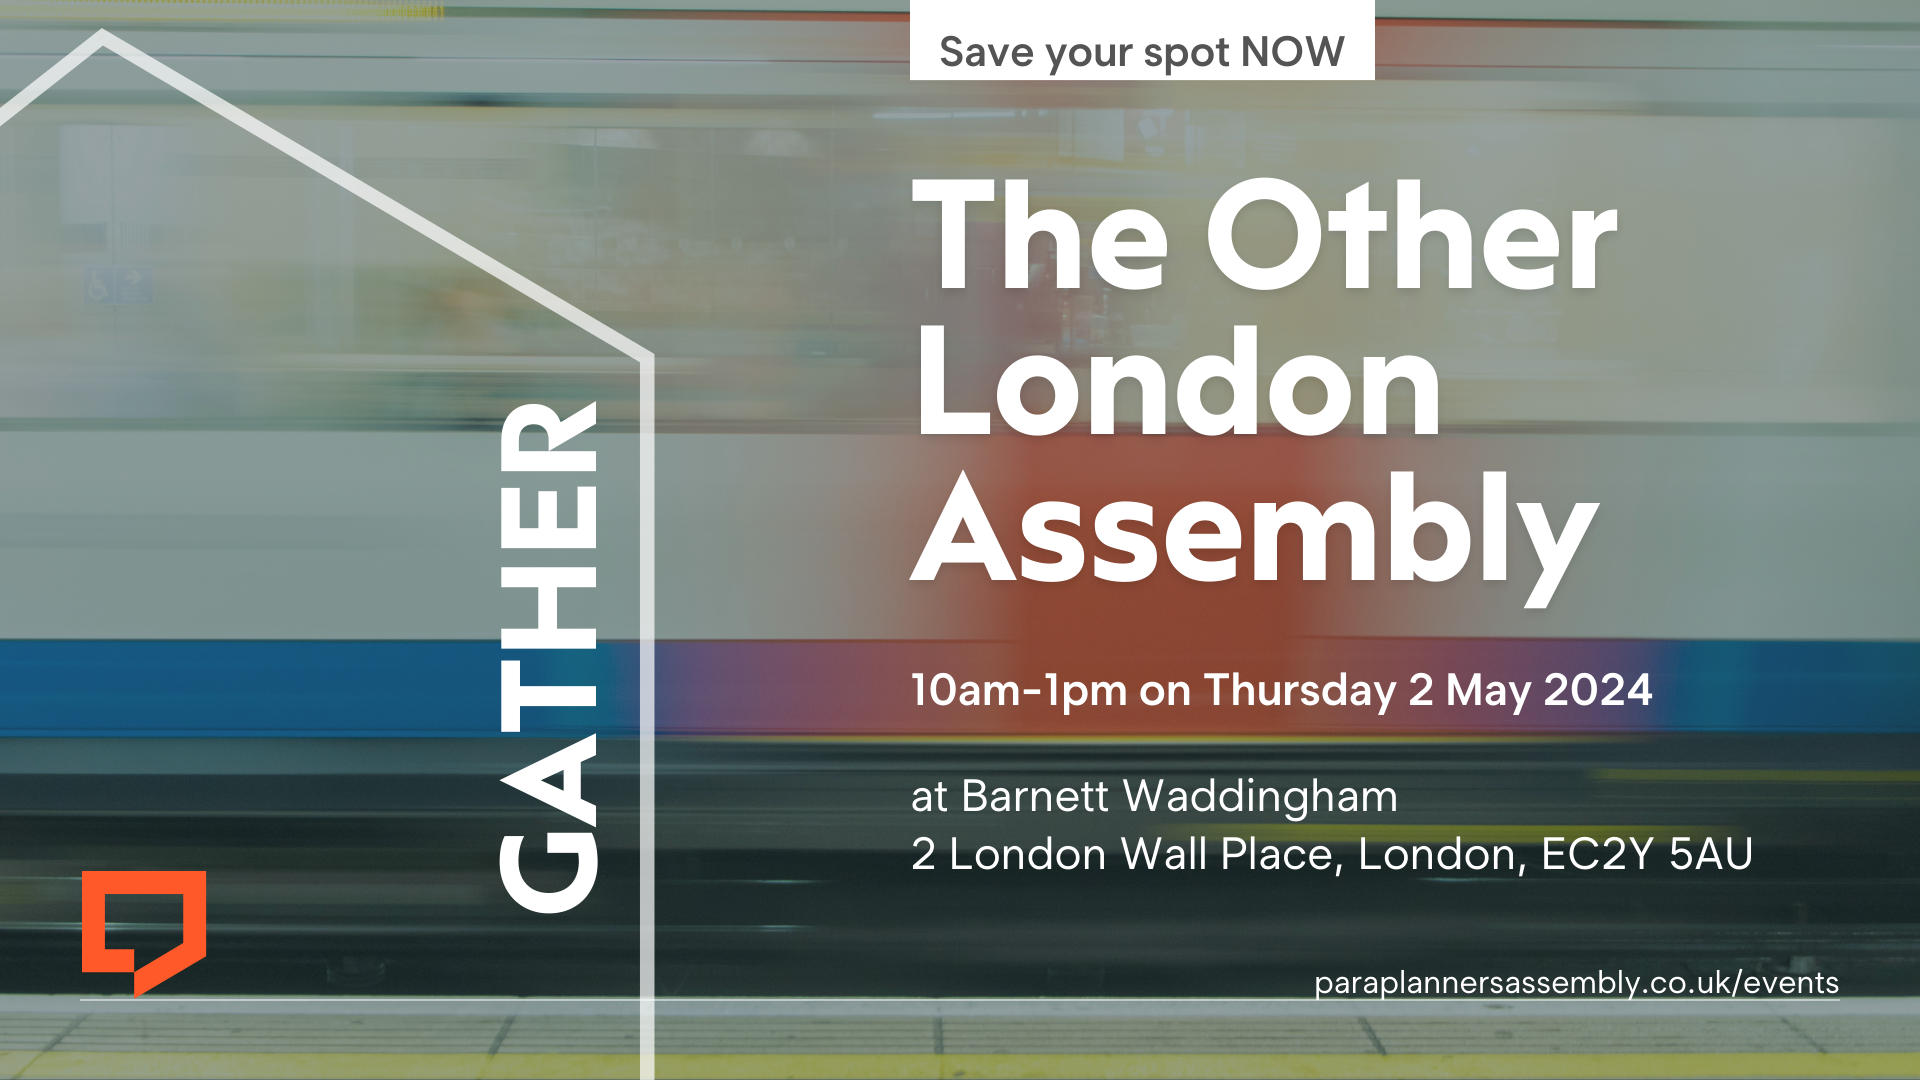 Save your spot now. The Other London Assembly. 10am-1pm on Thursday 2 May 2024 at Barnett Waddingham, 2 London Wall Place, London, EC2Y 5AU